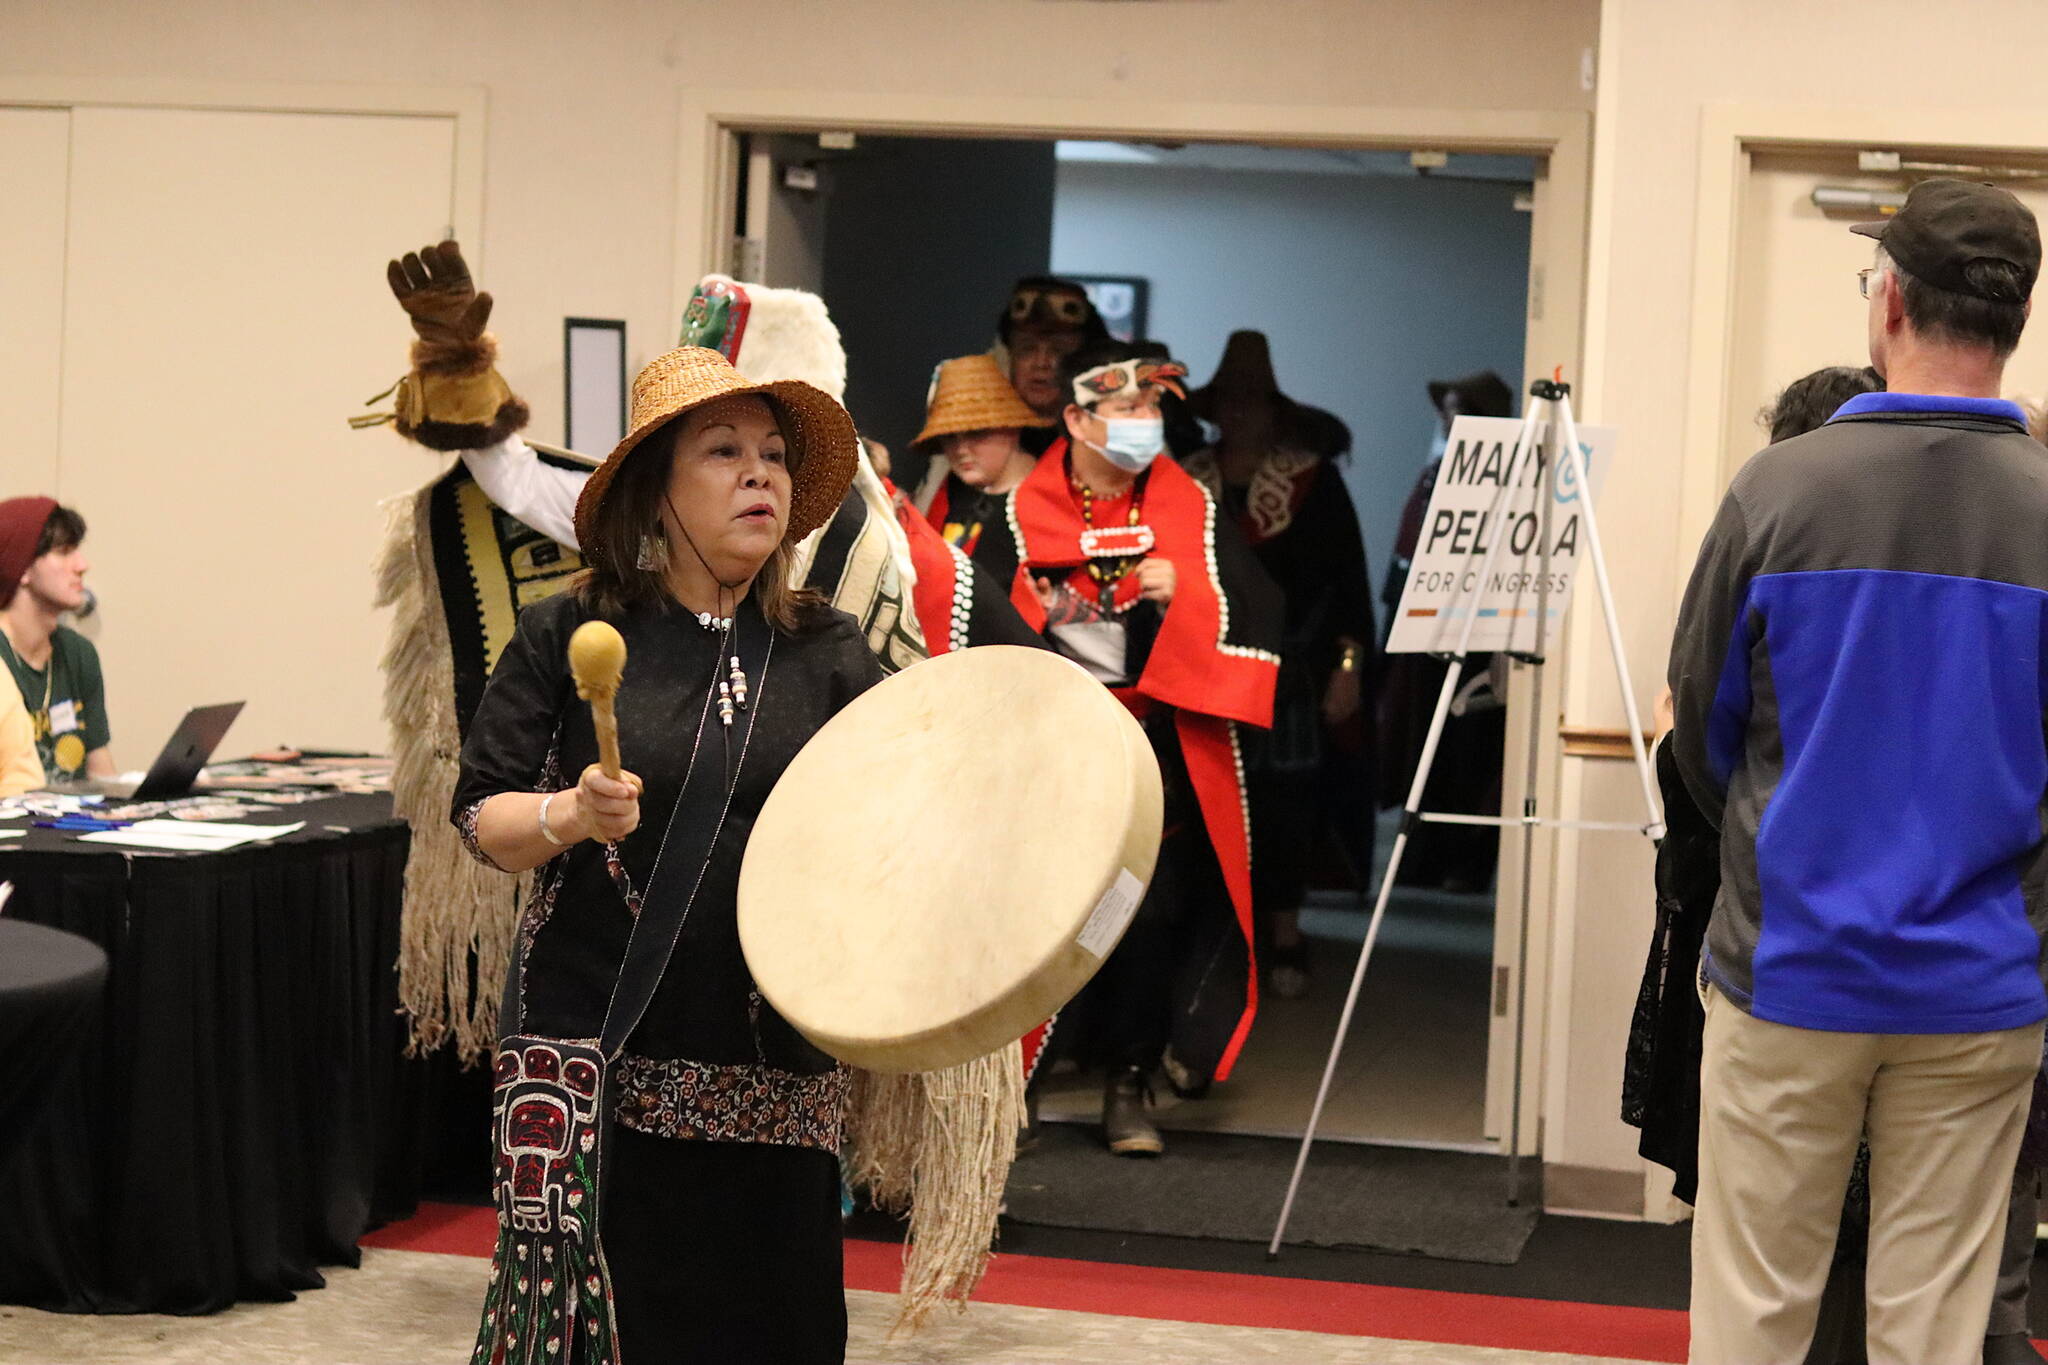 Nancy Barnes, a member of the Yees Ku Oo Dancers, leads a procession into the convention room at Elizabeth Peratrovich Hall on Monday to begin a reelection event for U.S. Rep. Mary Peltola. Barnes said she has known Peltola since the Congresswoman was an intern for KTOO more than 20 years ago and “I knew she was going to do big things.” (Mark Sabbatini / Juneau Empire)